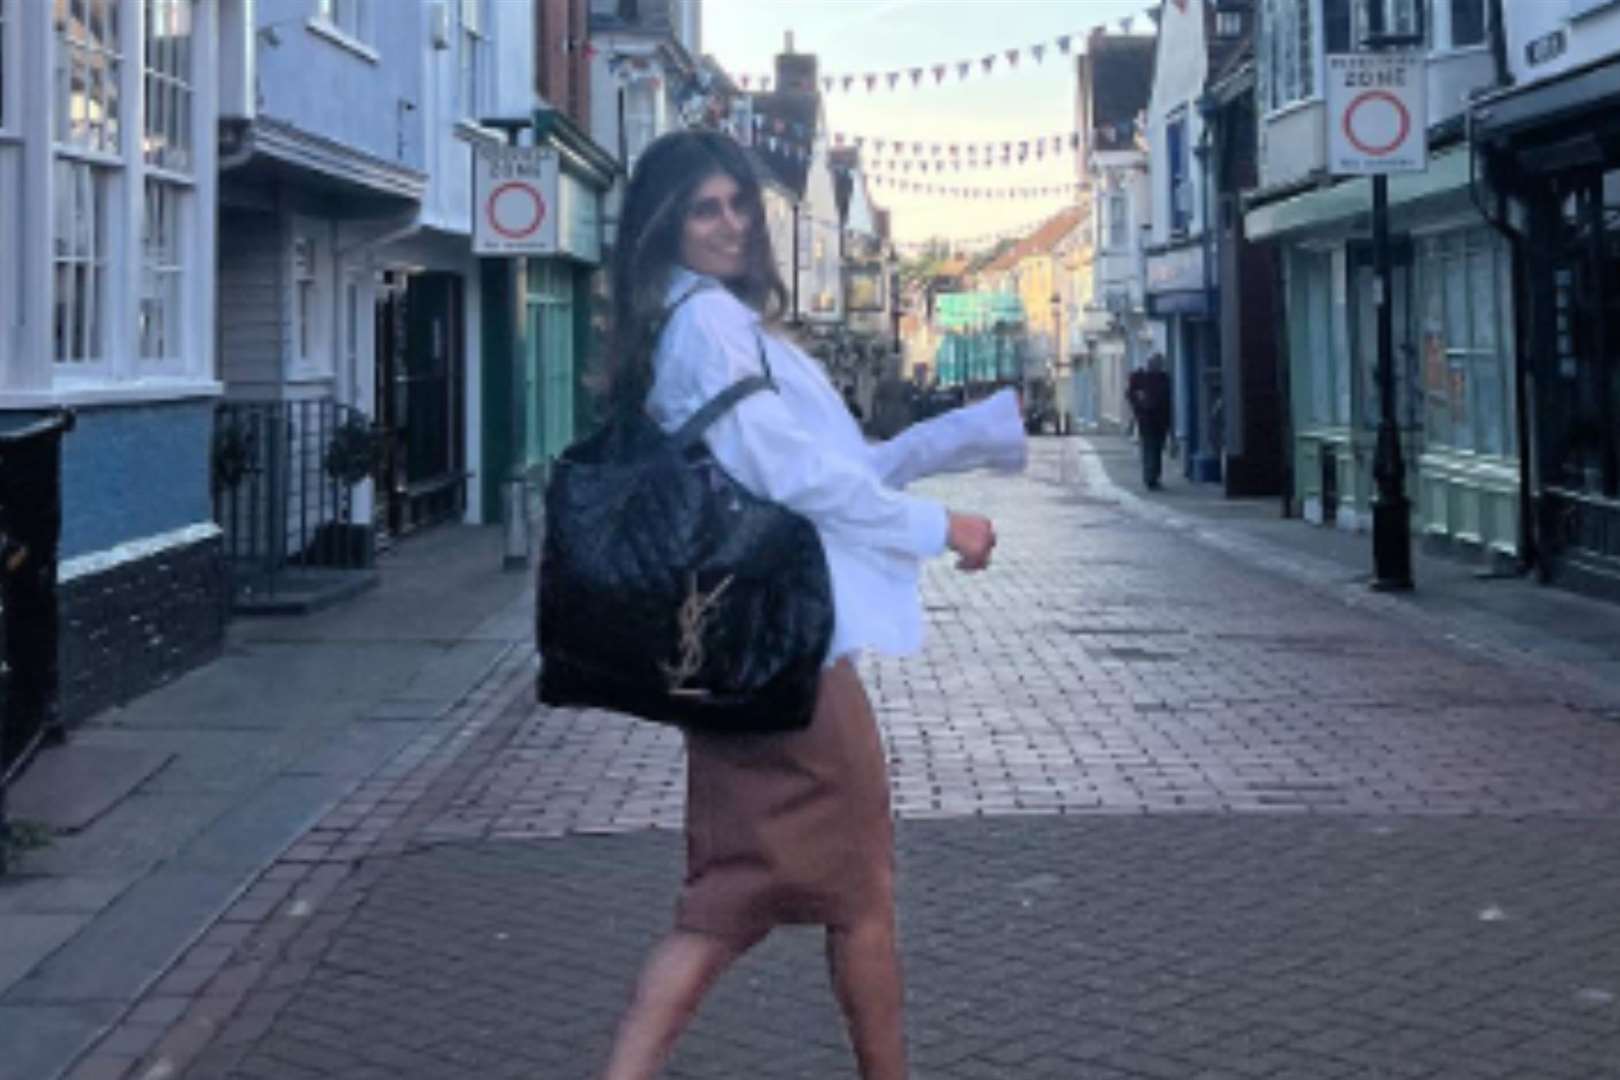 The world famous actress ventured into the centre of Faversham. Picture: Mia Khalifa/Instagram